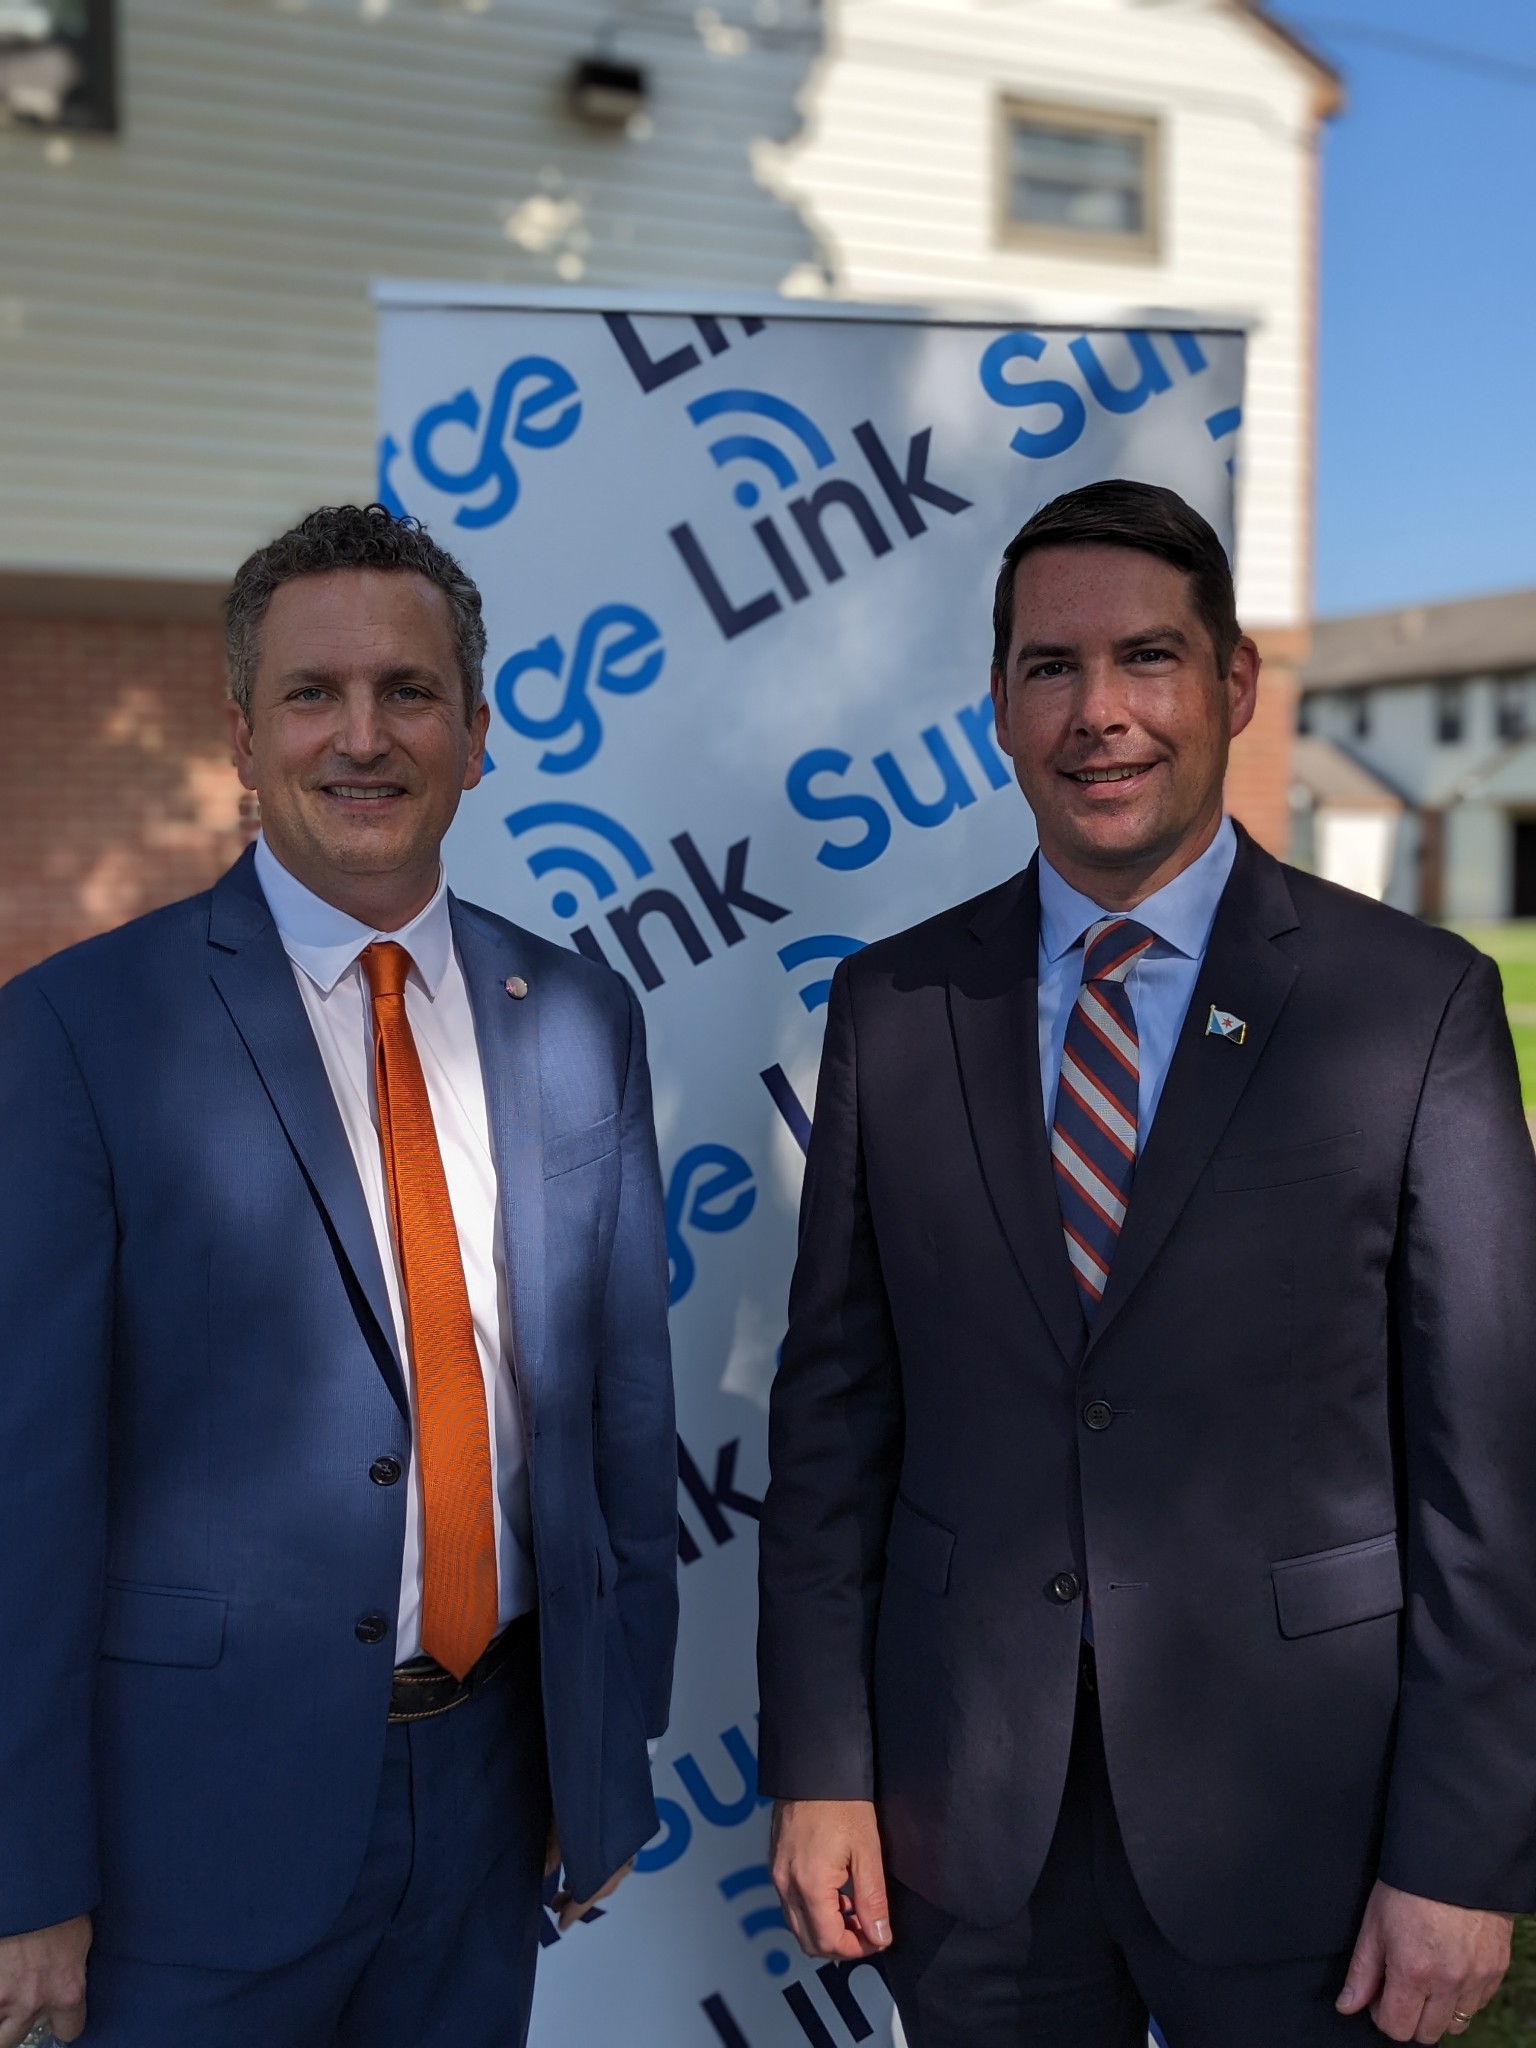 Davenport with Mayor Ben Walsh at Surge Link launch